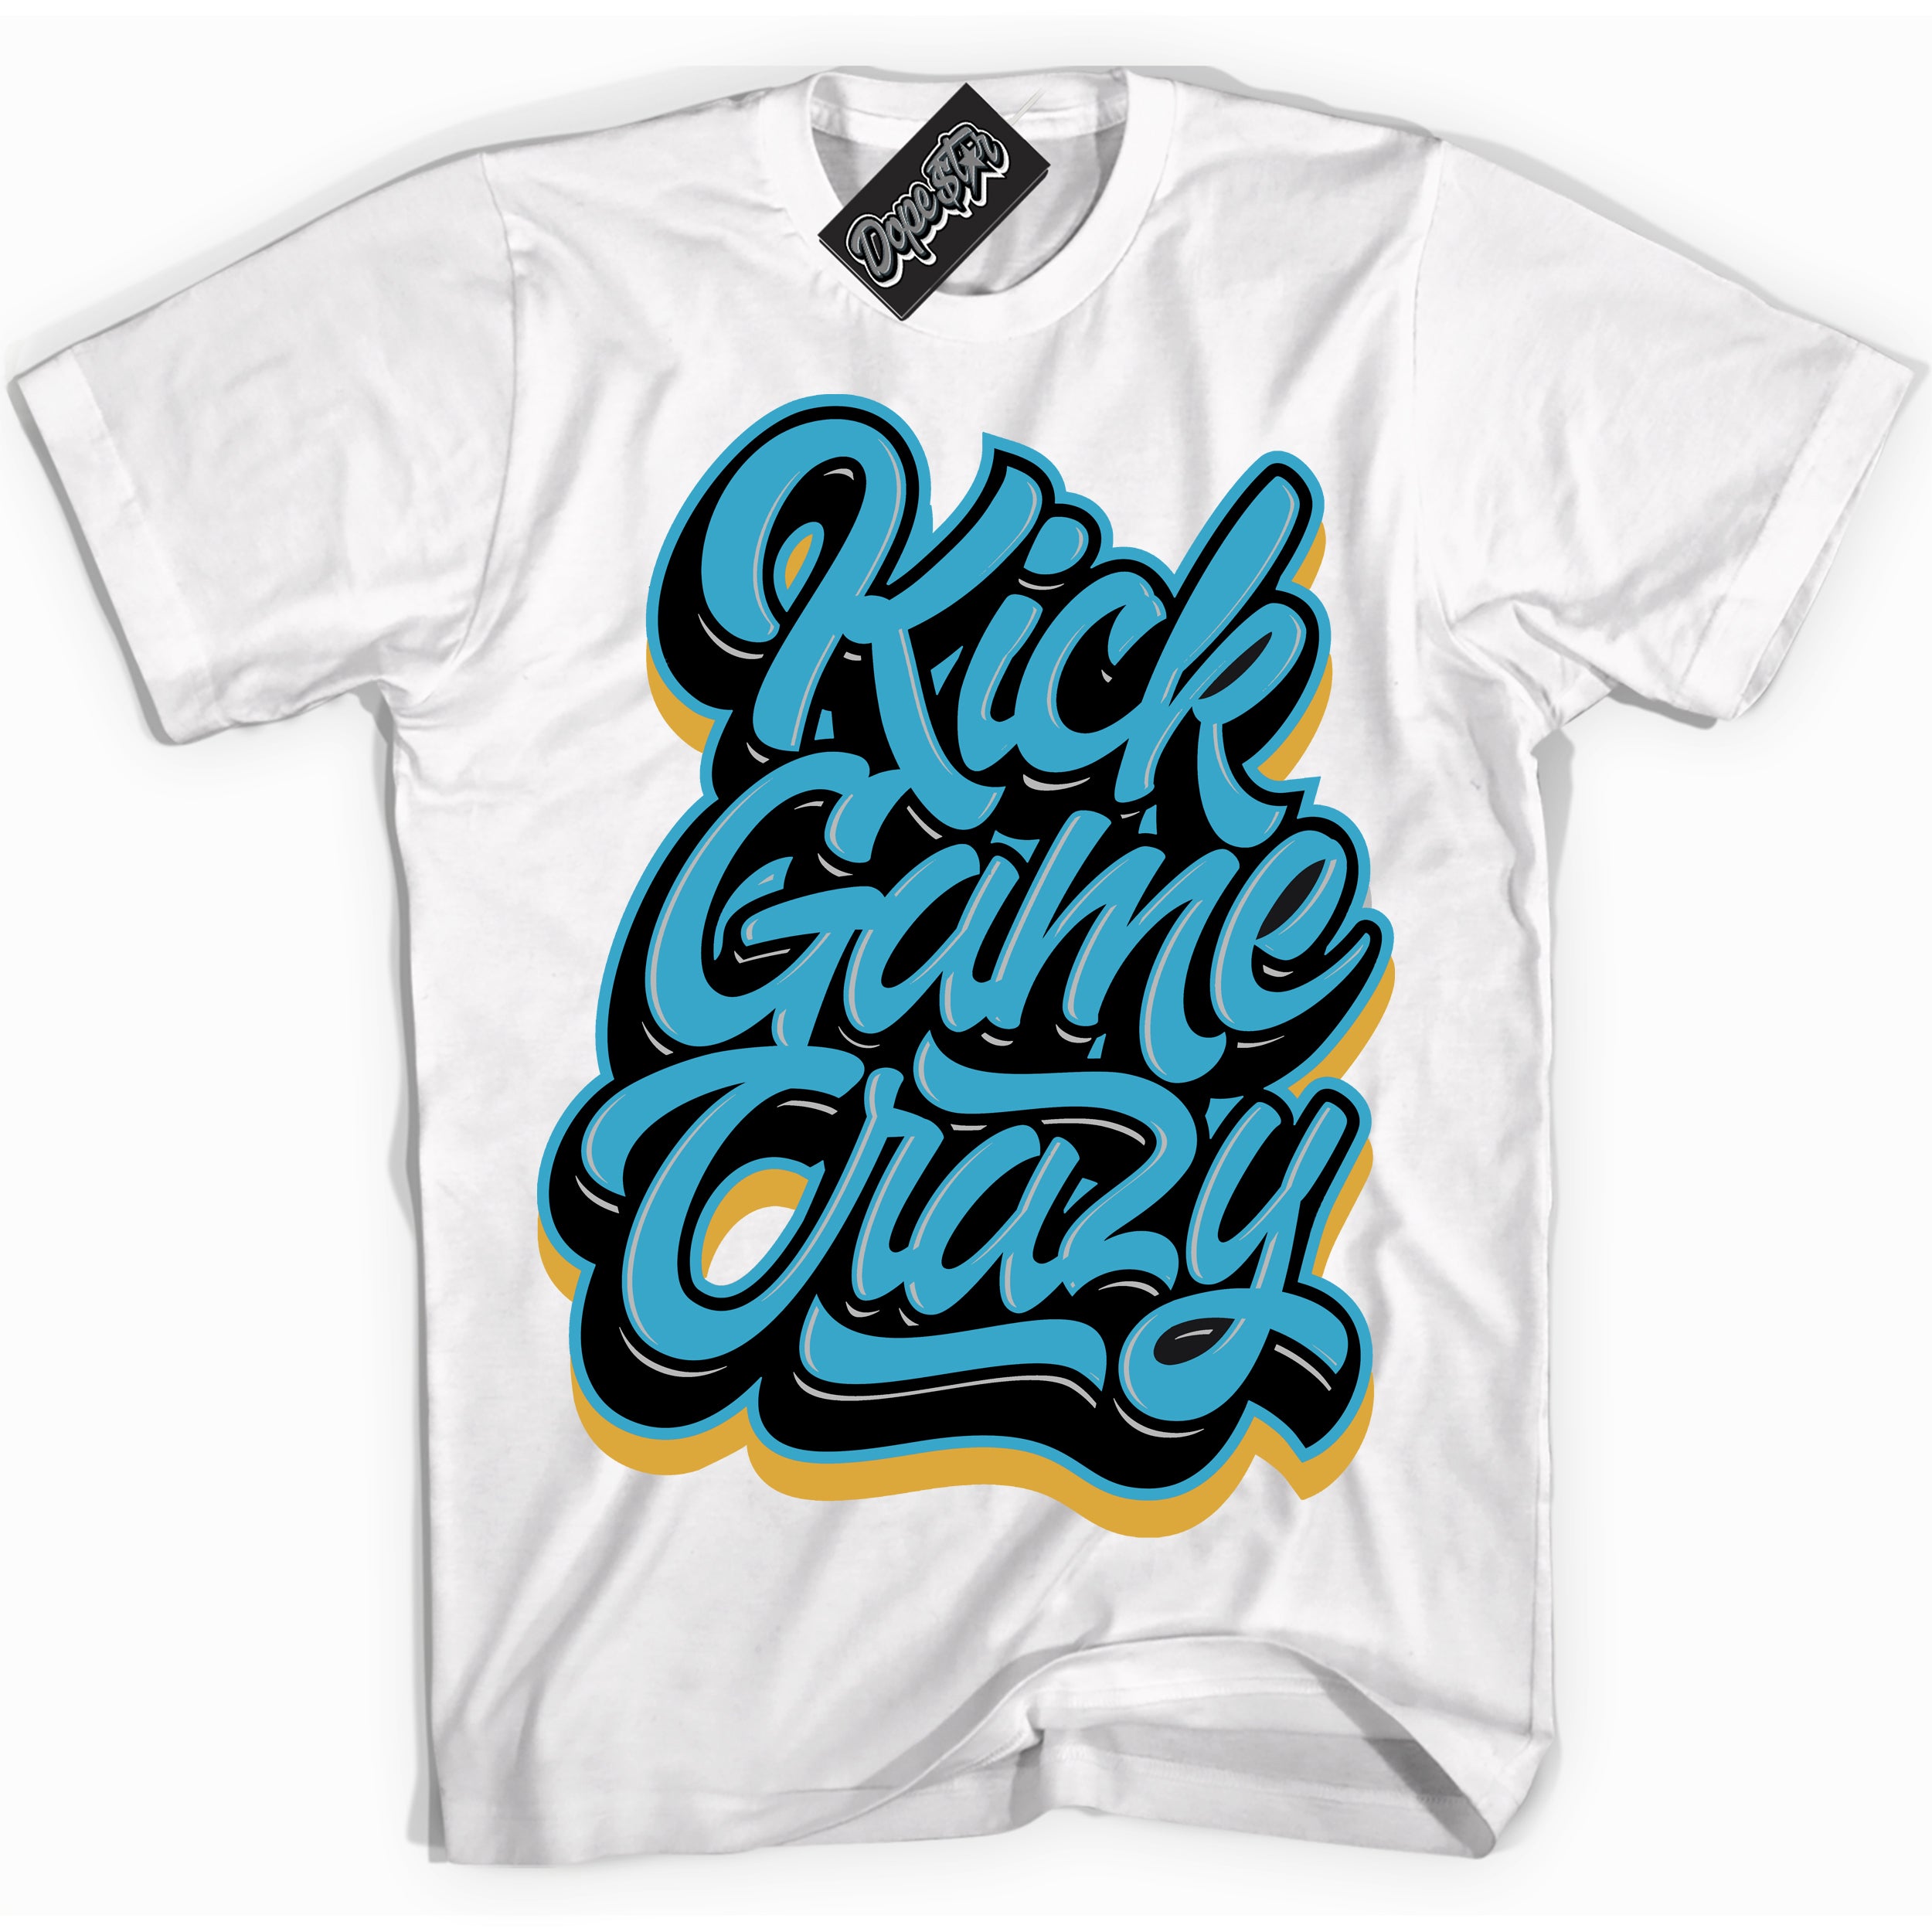 Cool White Shirt with “ Kick Game Crazy” design that perfectly matches Aqua 5s Sneakers.